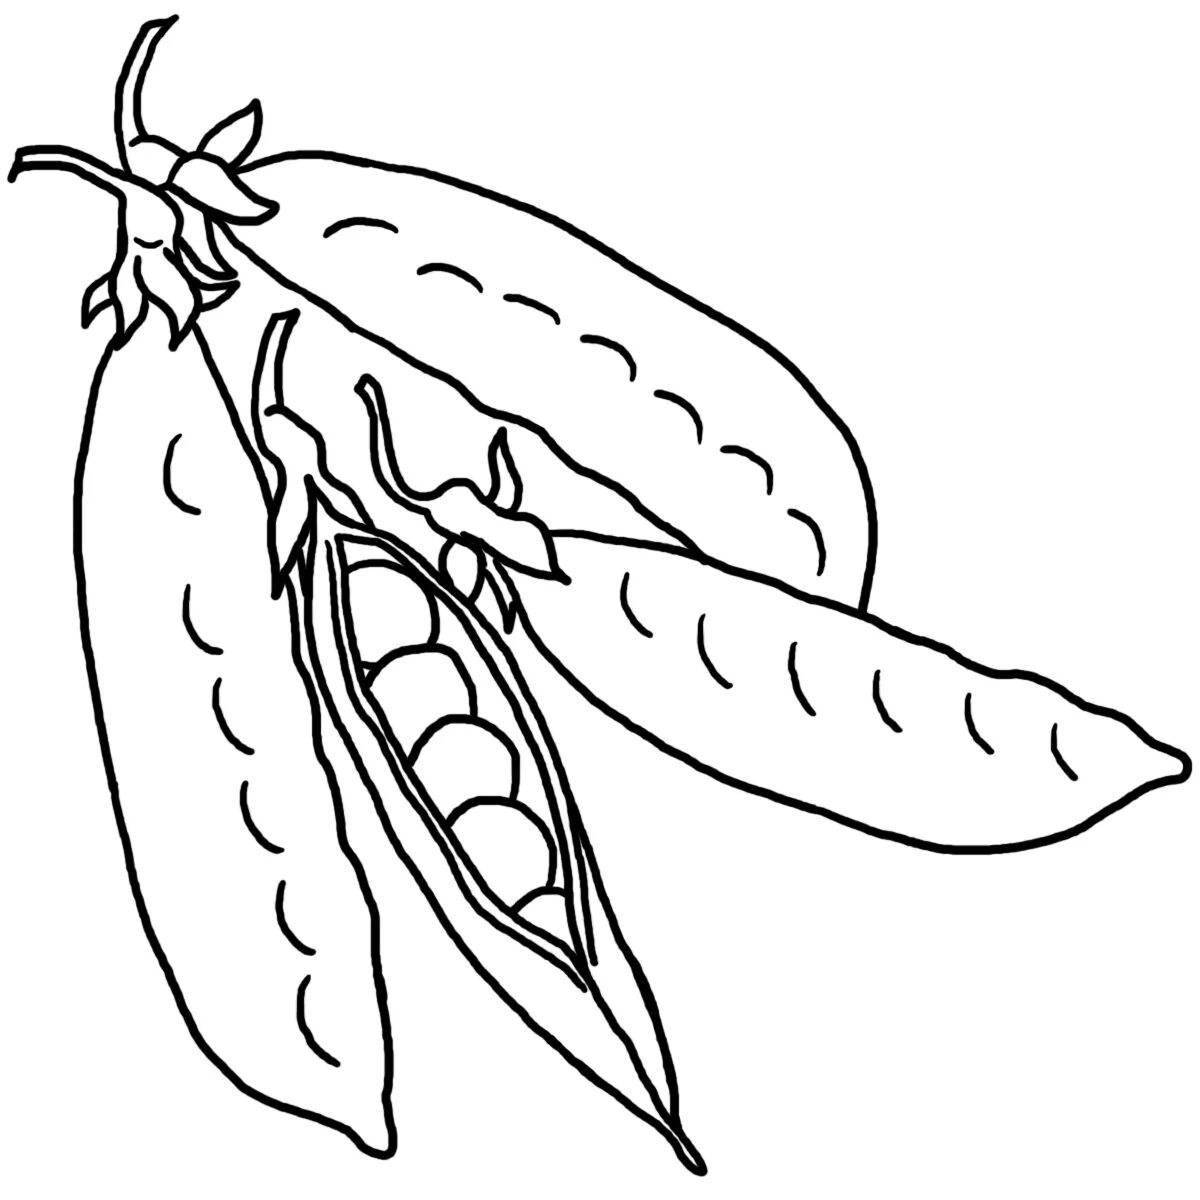 Shiny beans coloring page for students